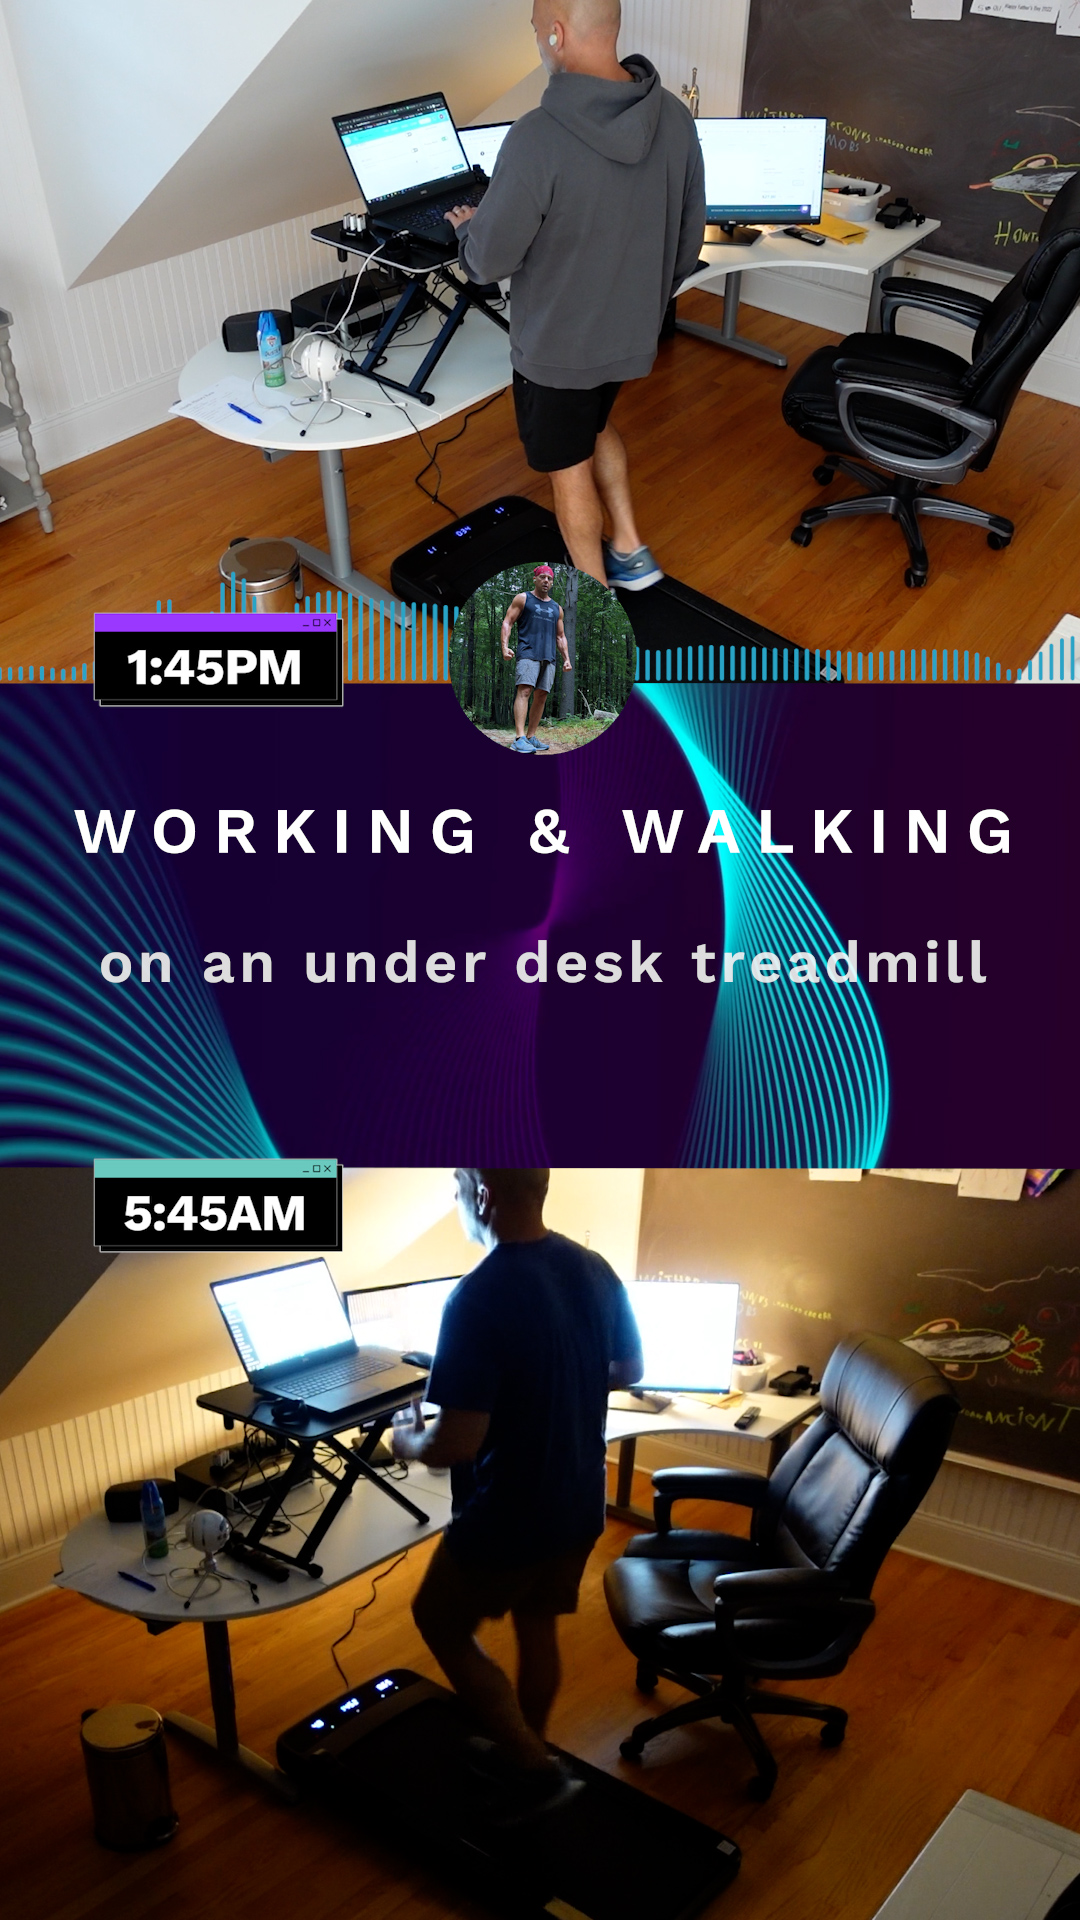 Featured image for “Working & walking on an under desk treadmill #WFH”